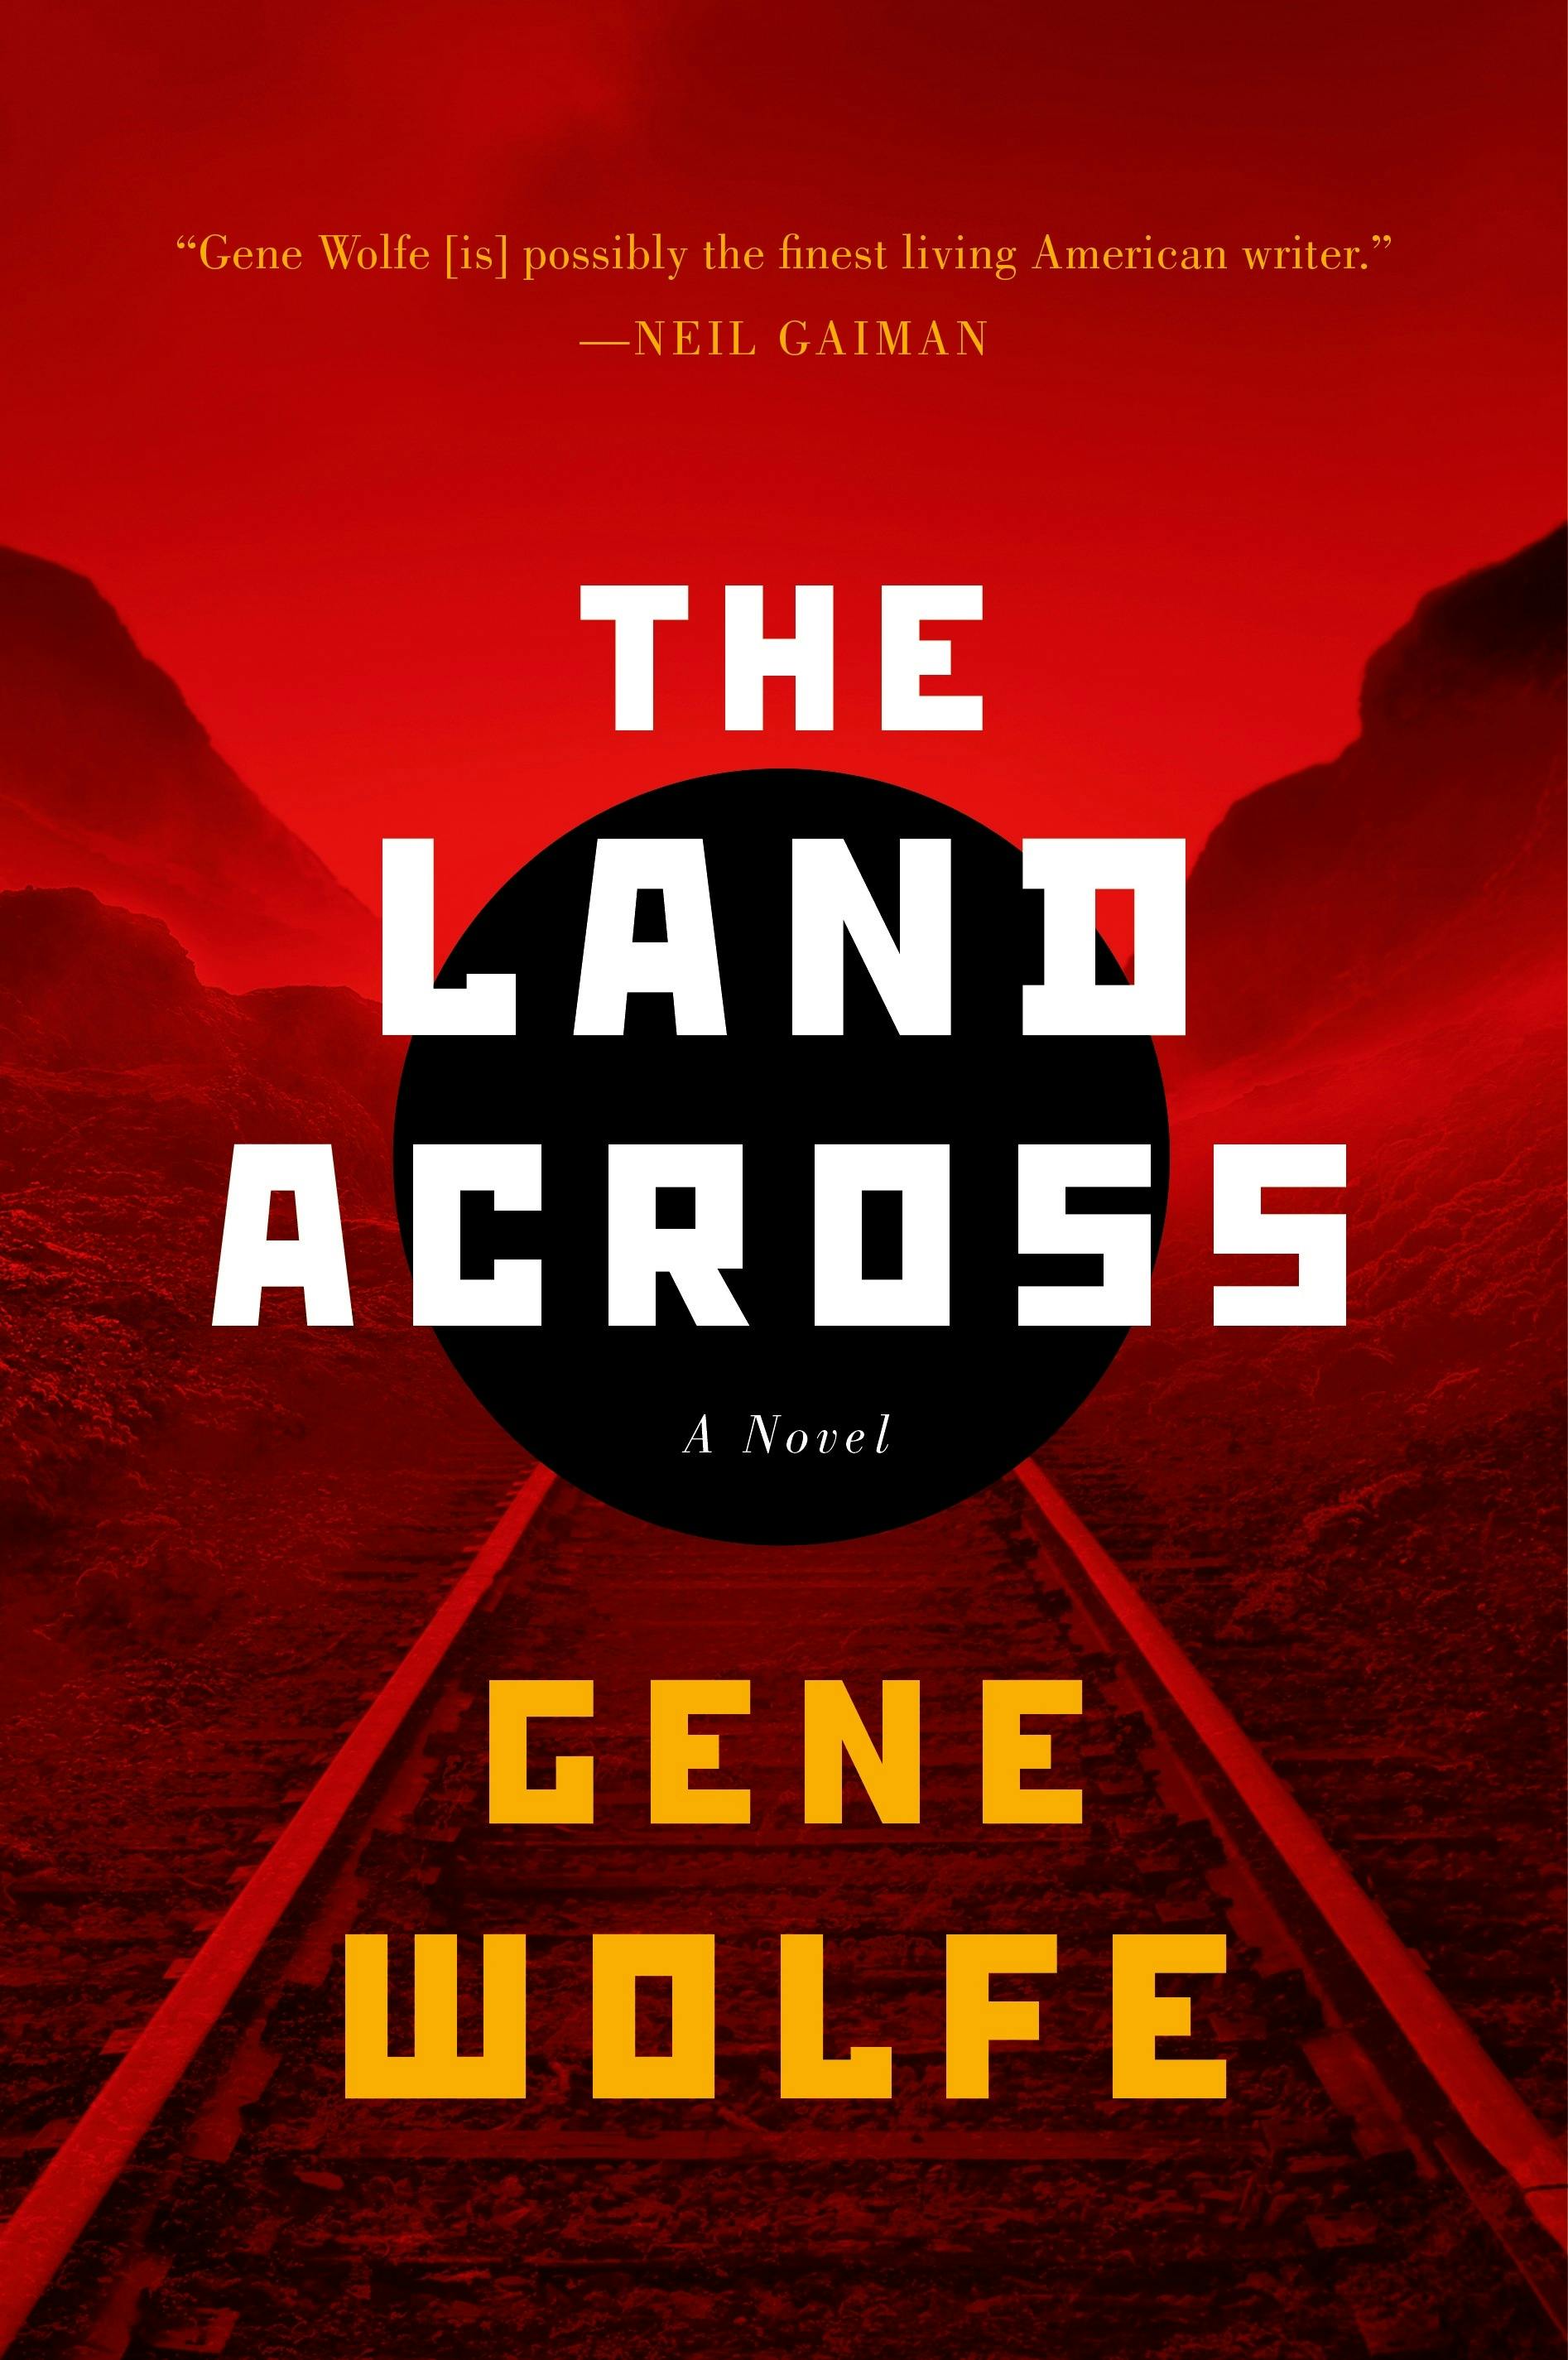 Cover for the book titled as: The Land Across